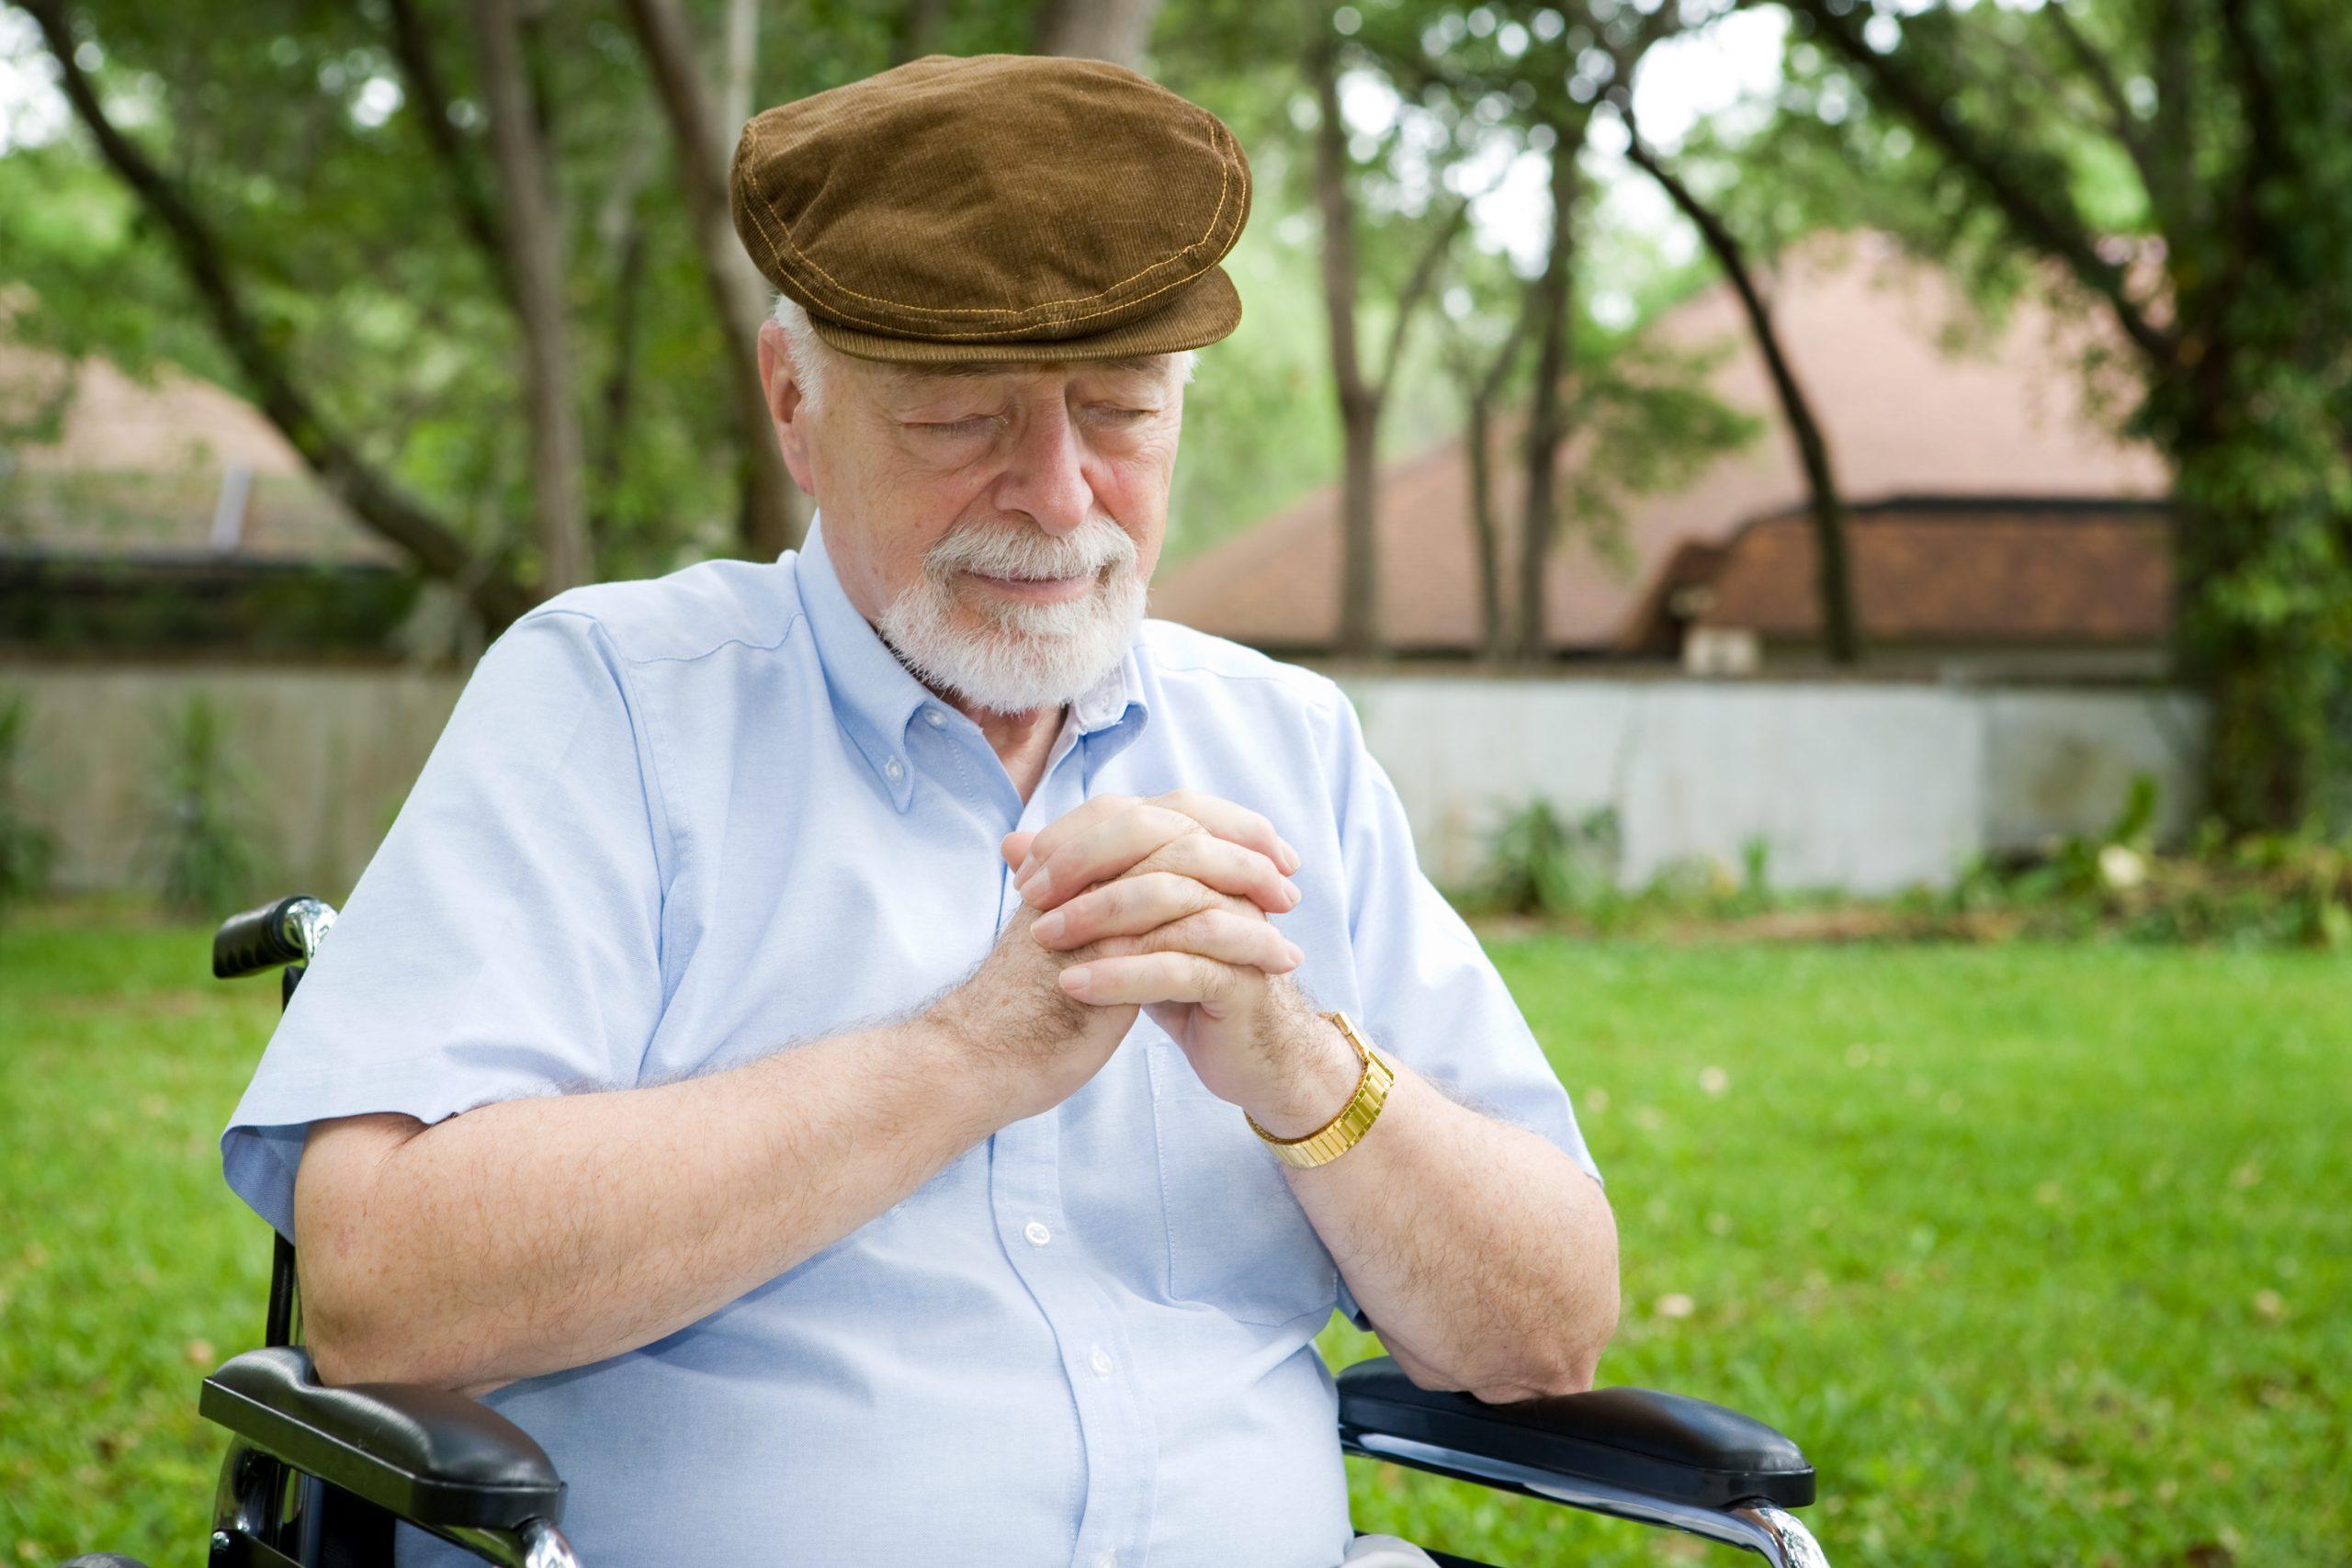 What Is Jewish Senior Living, and How Is It Different From Regular Senior Care?